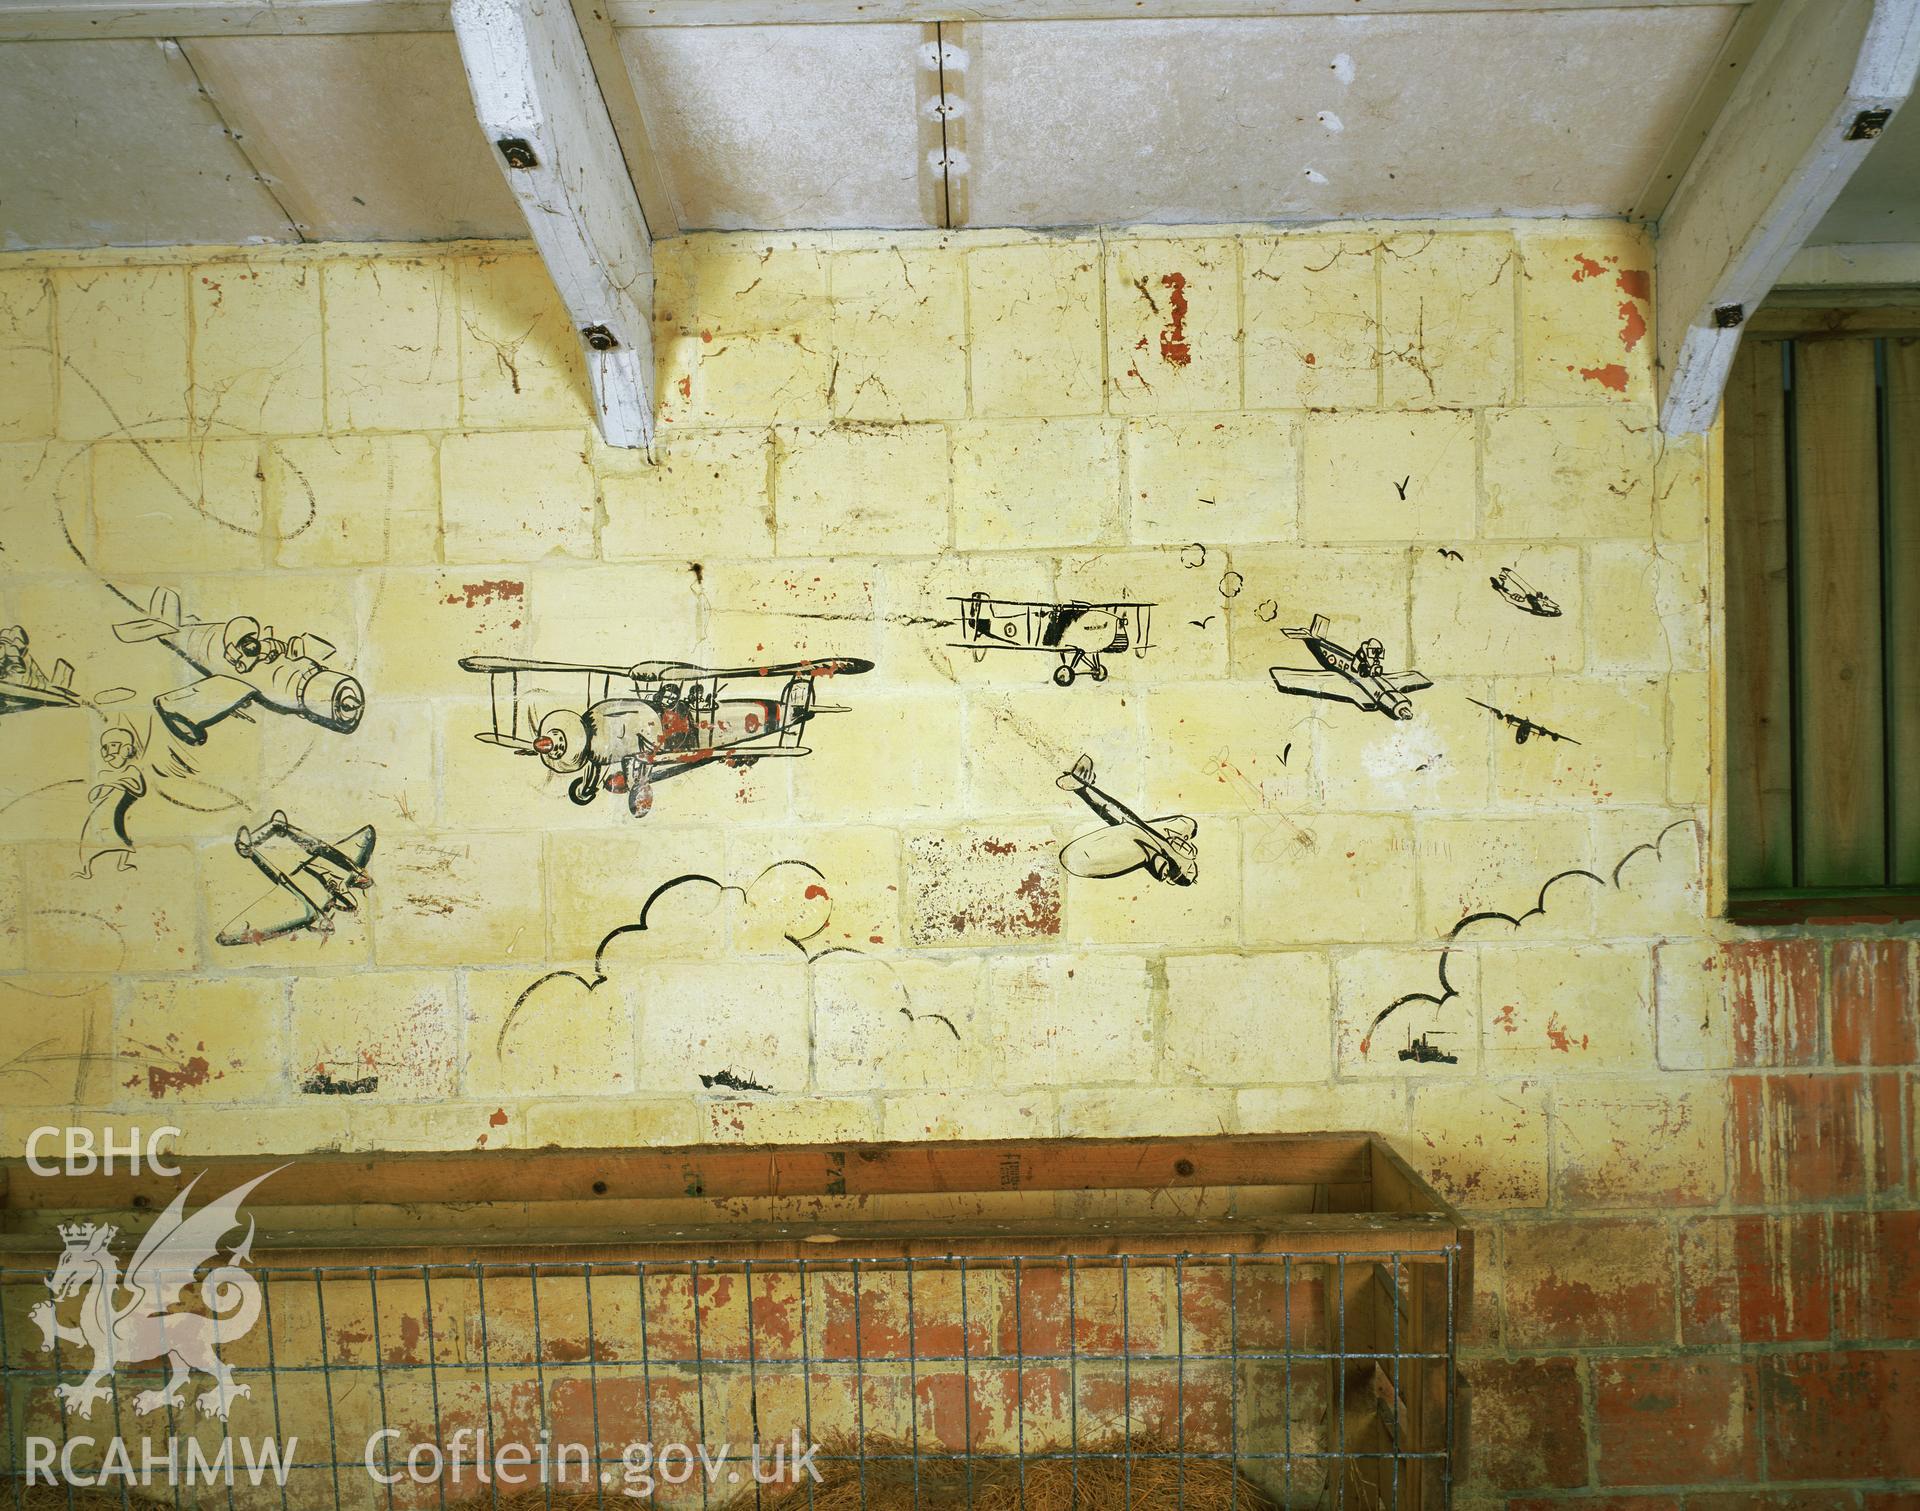 RCAHMW colour transparency showing wallpaintings in the accommodation blocks at Dale Airfield